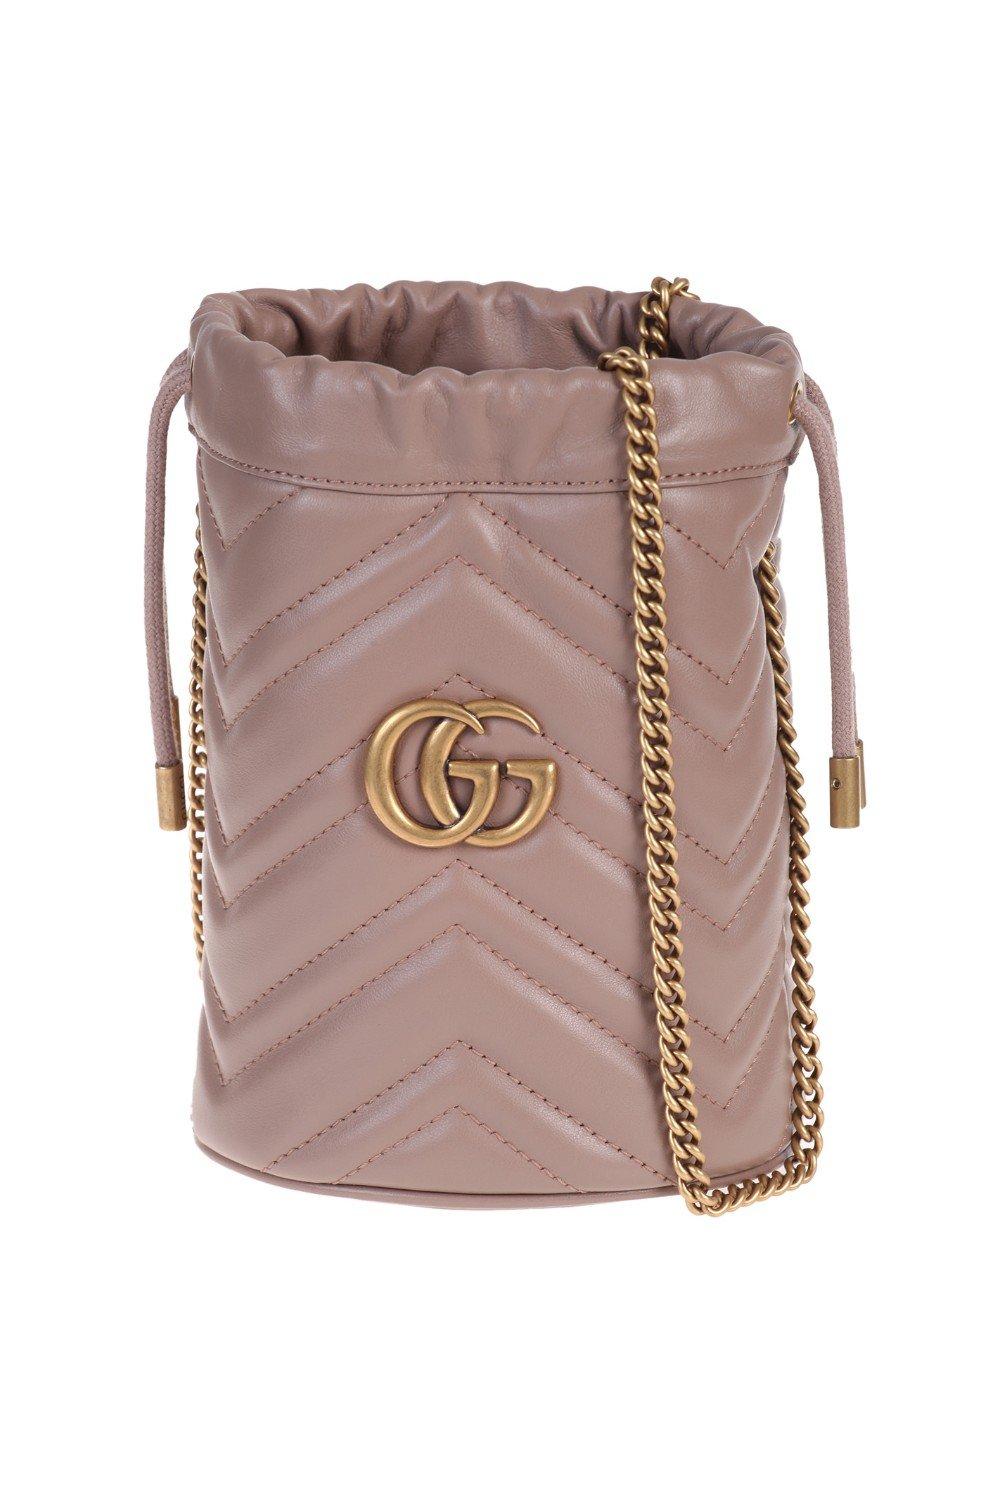 Gucci Leather Gg Marmont Mini Bucket Bag - Lyst